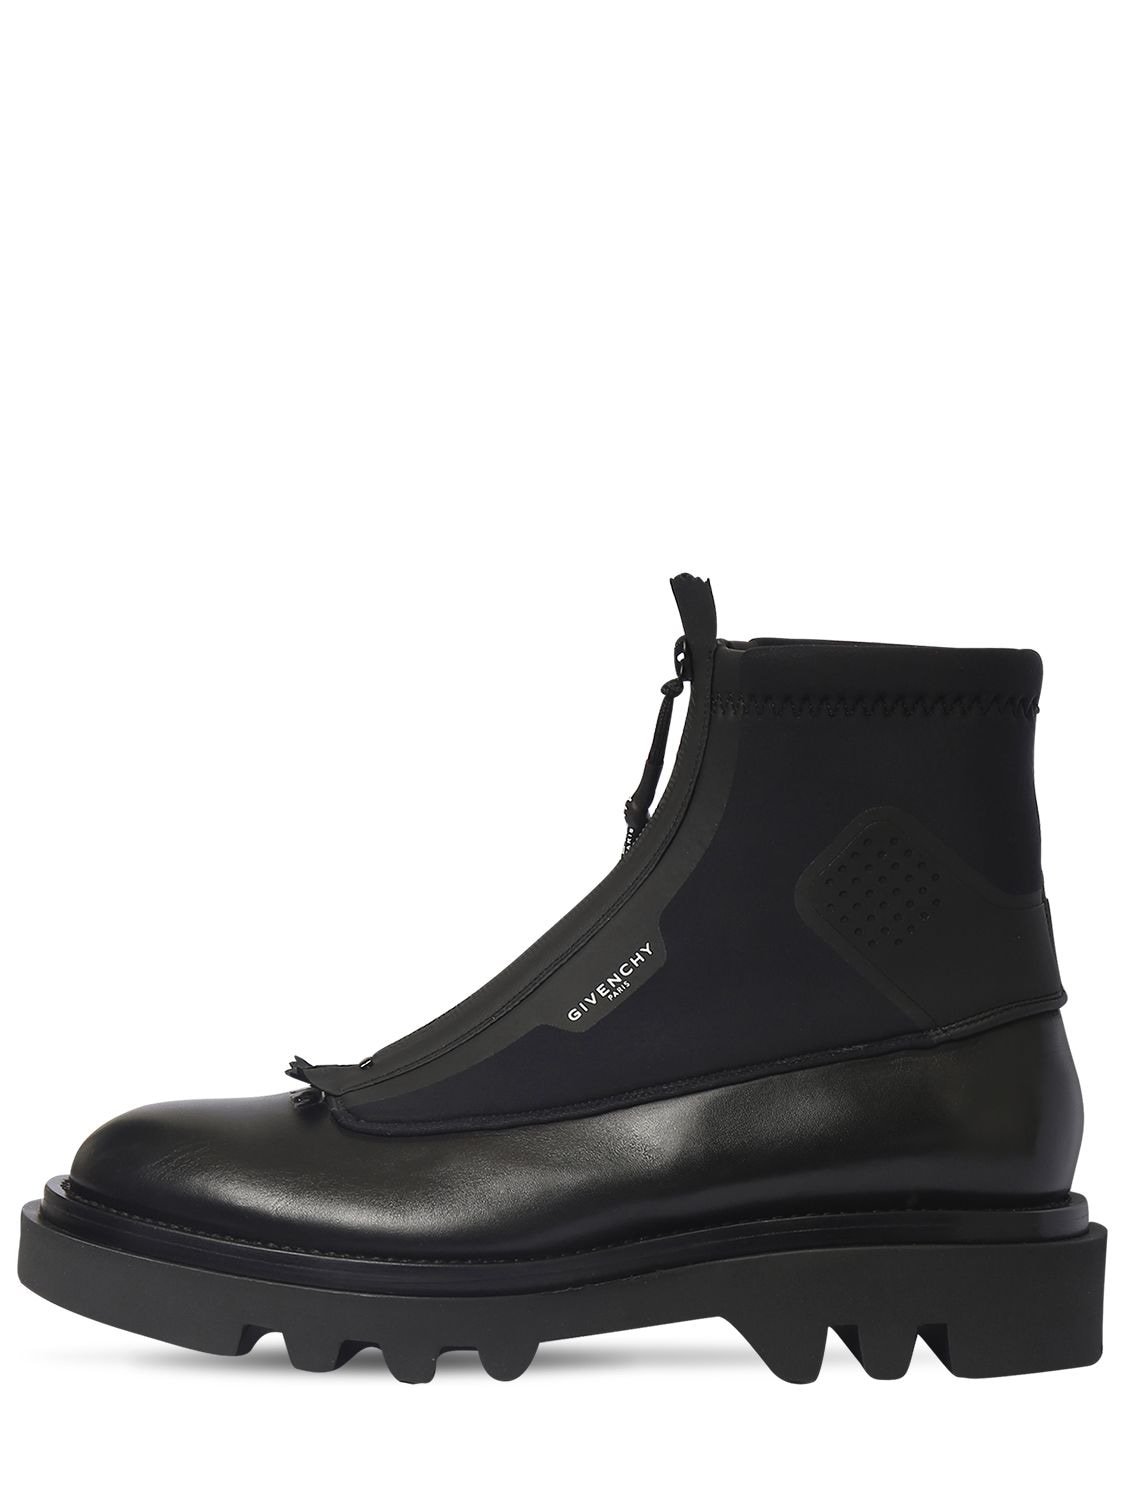 GIVENCHY LOGO LEATHER & NEOPRENE COMBAT BOOTS,72IL01003-MDAX0